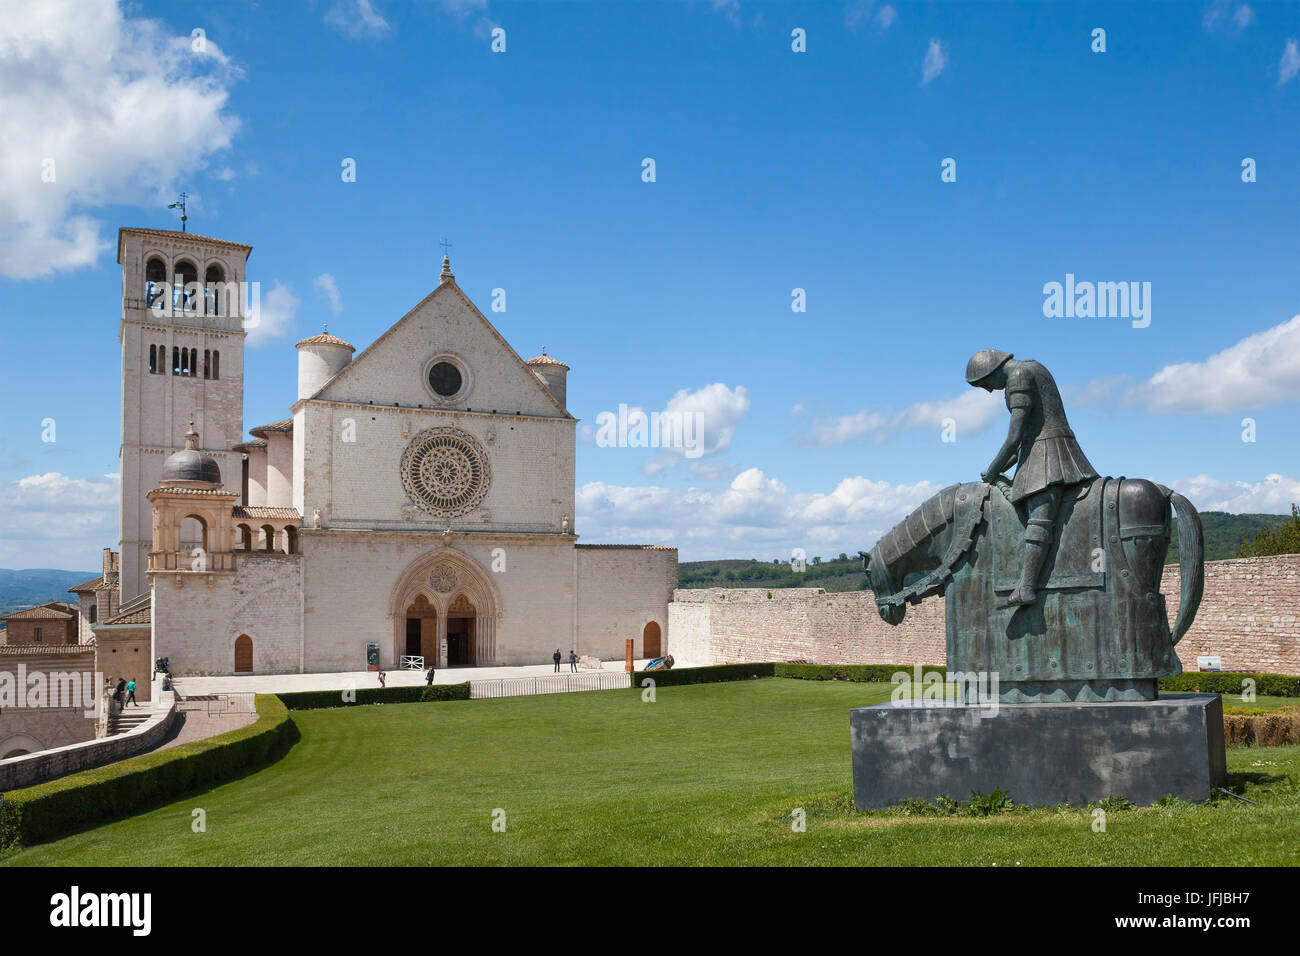 Europe, Italy, Umbria, Perugia, Basilica of St. Francis of Assisi with statue Stock Photo